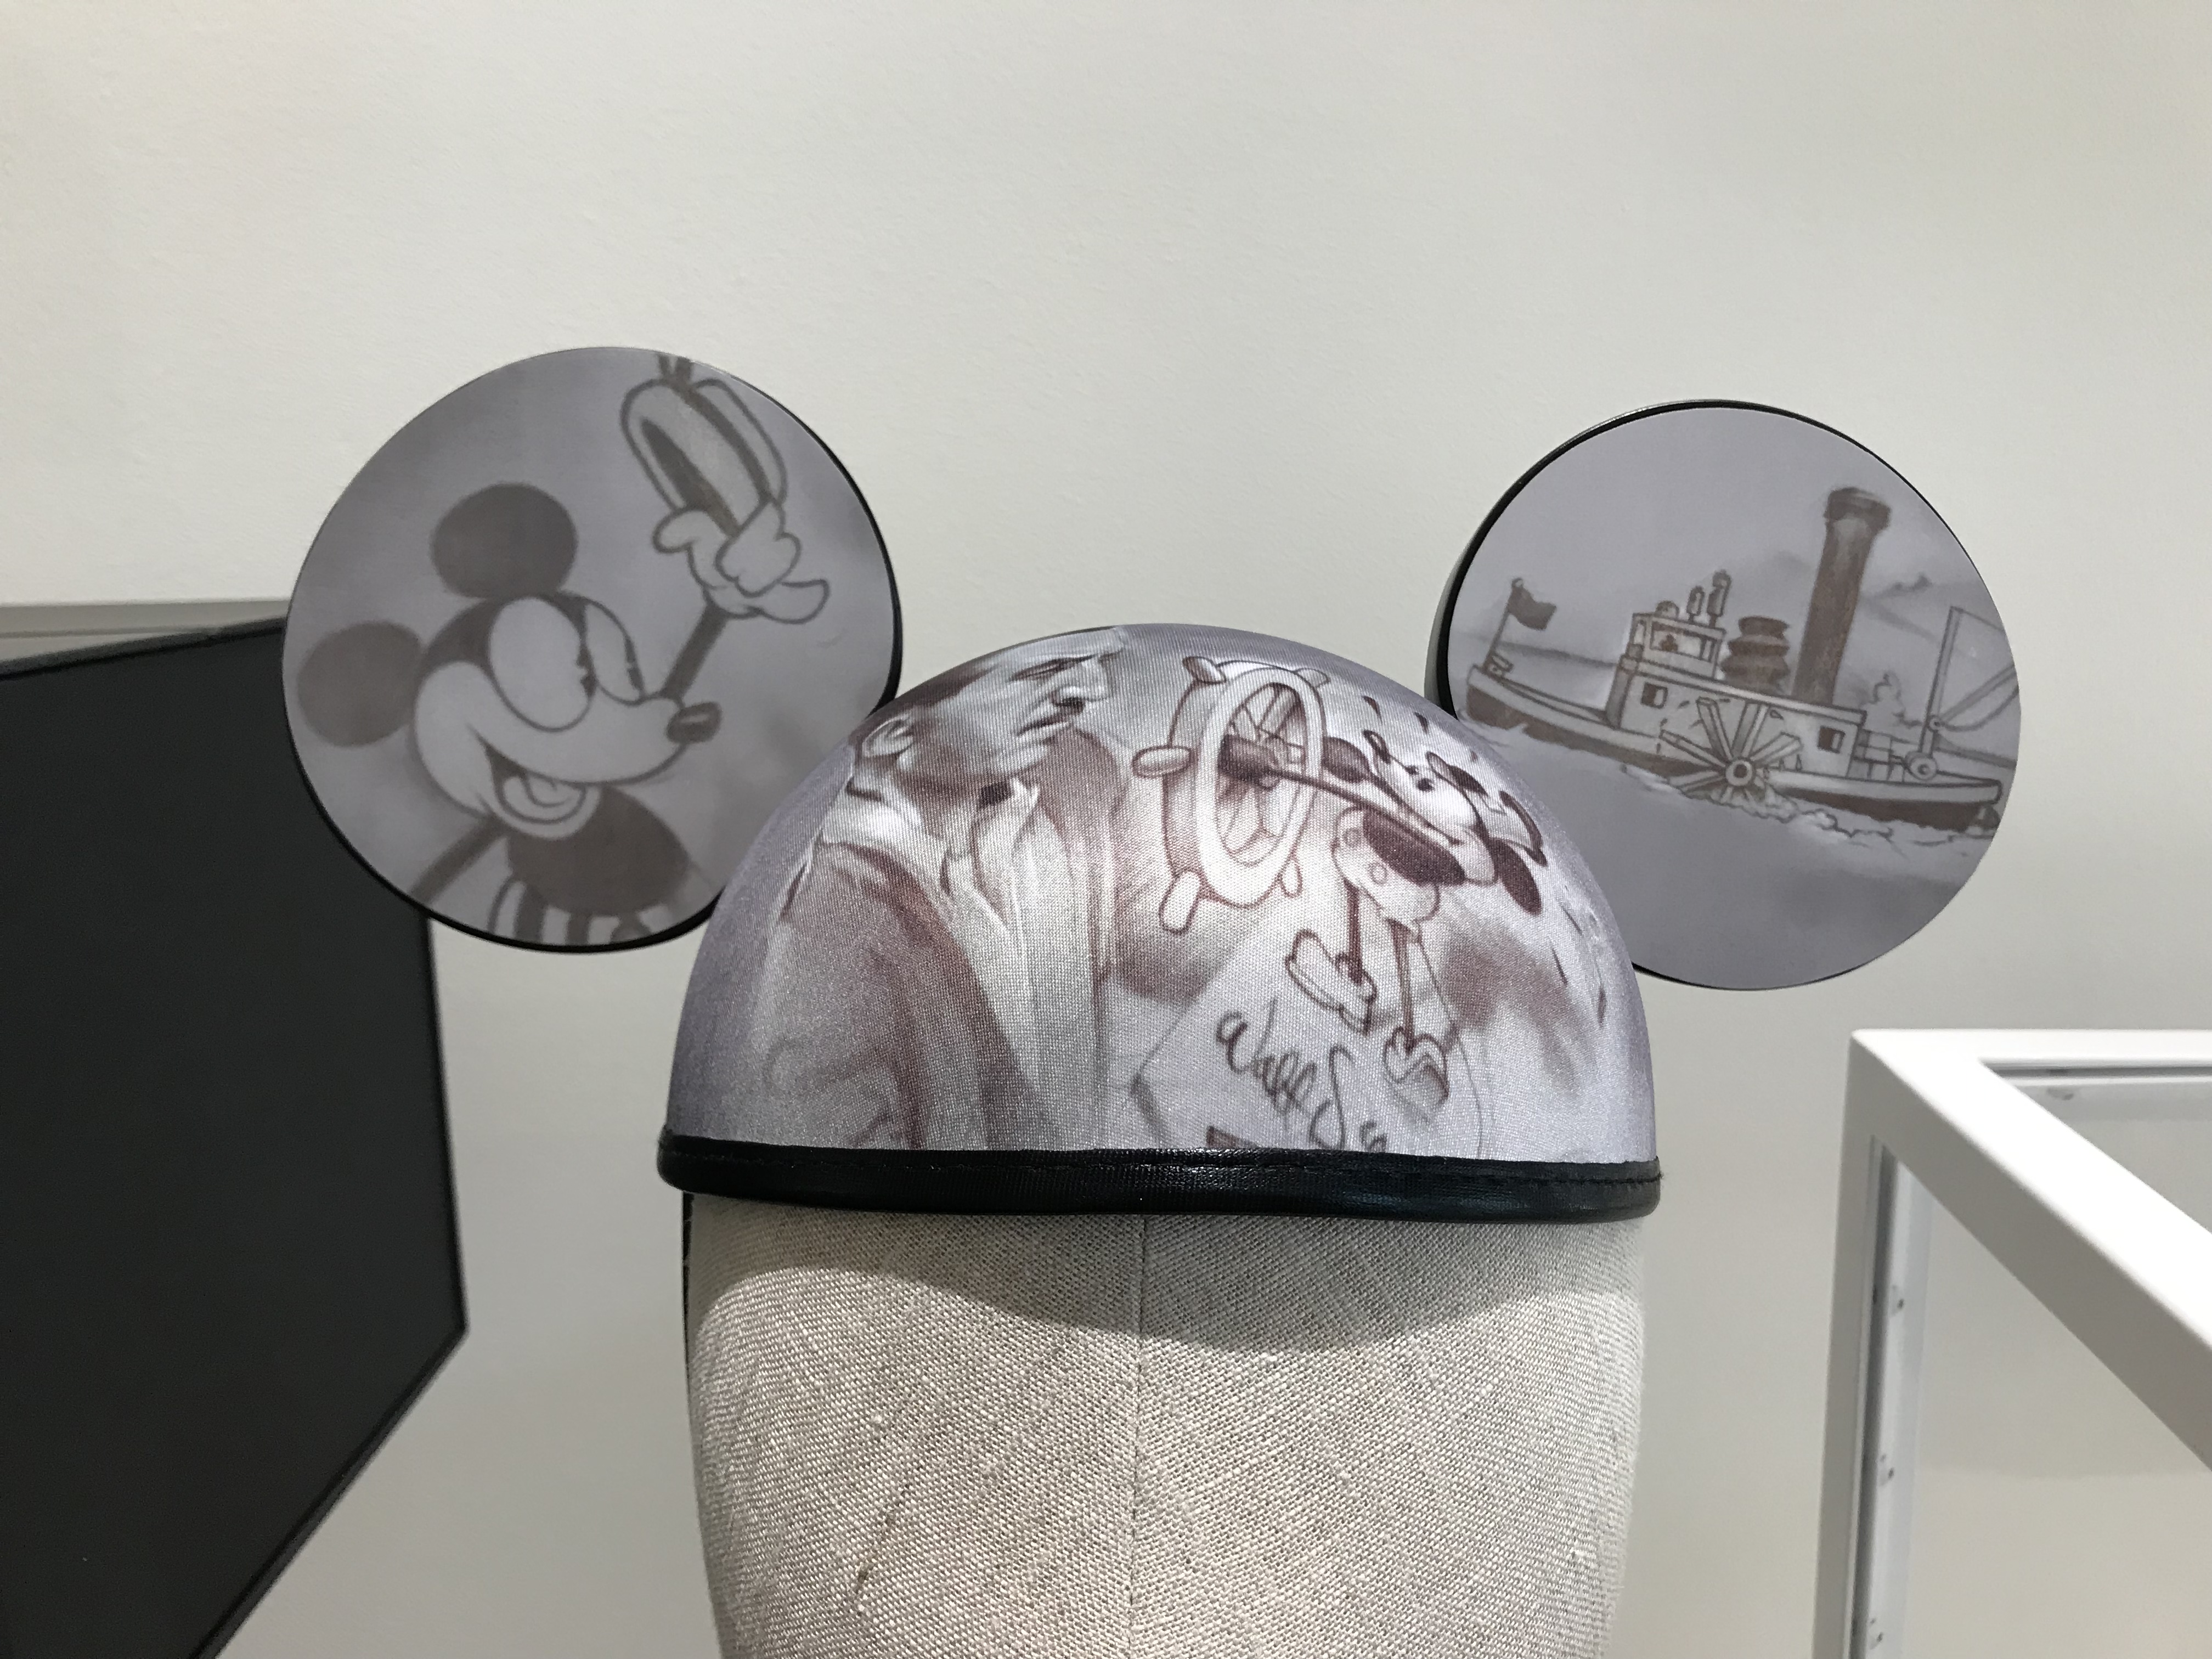 Steamboat Willie Mickey Ears By Renowned Artist Noah